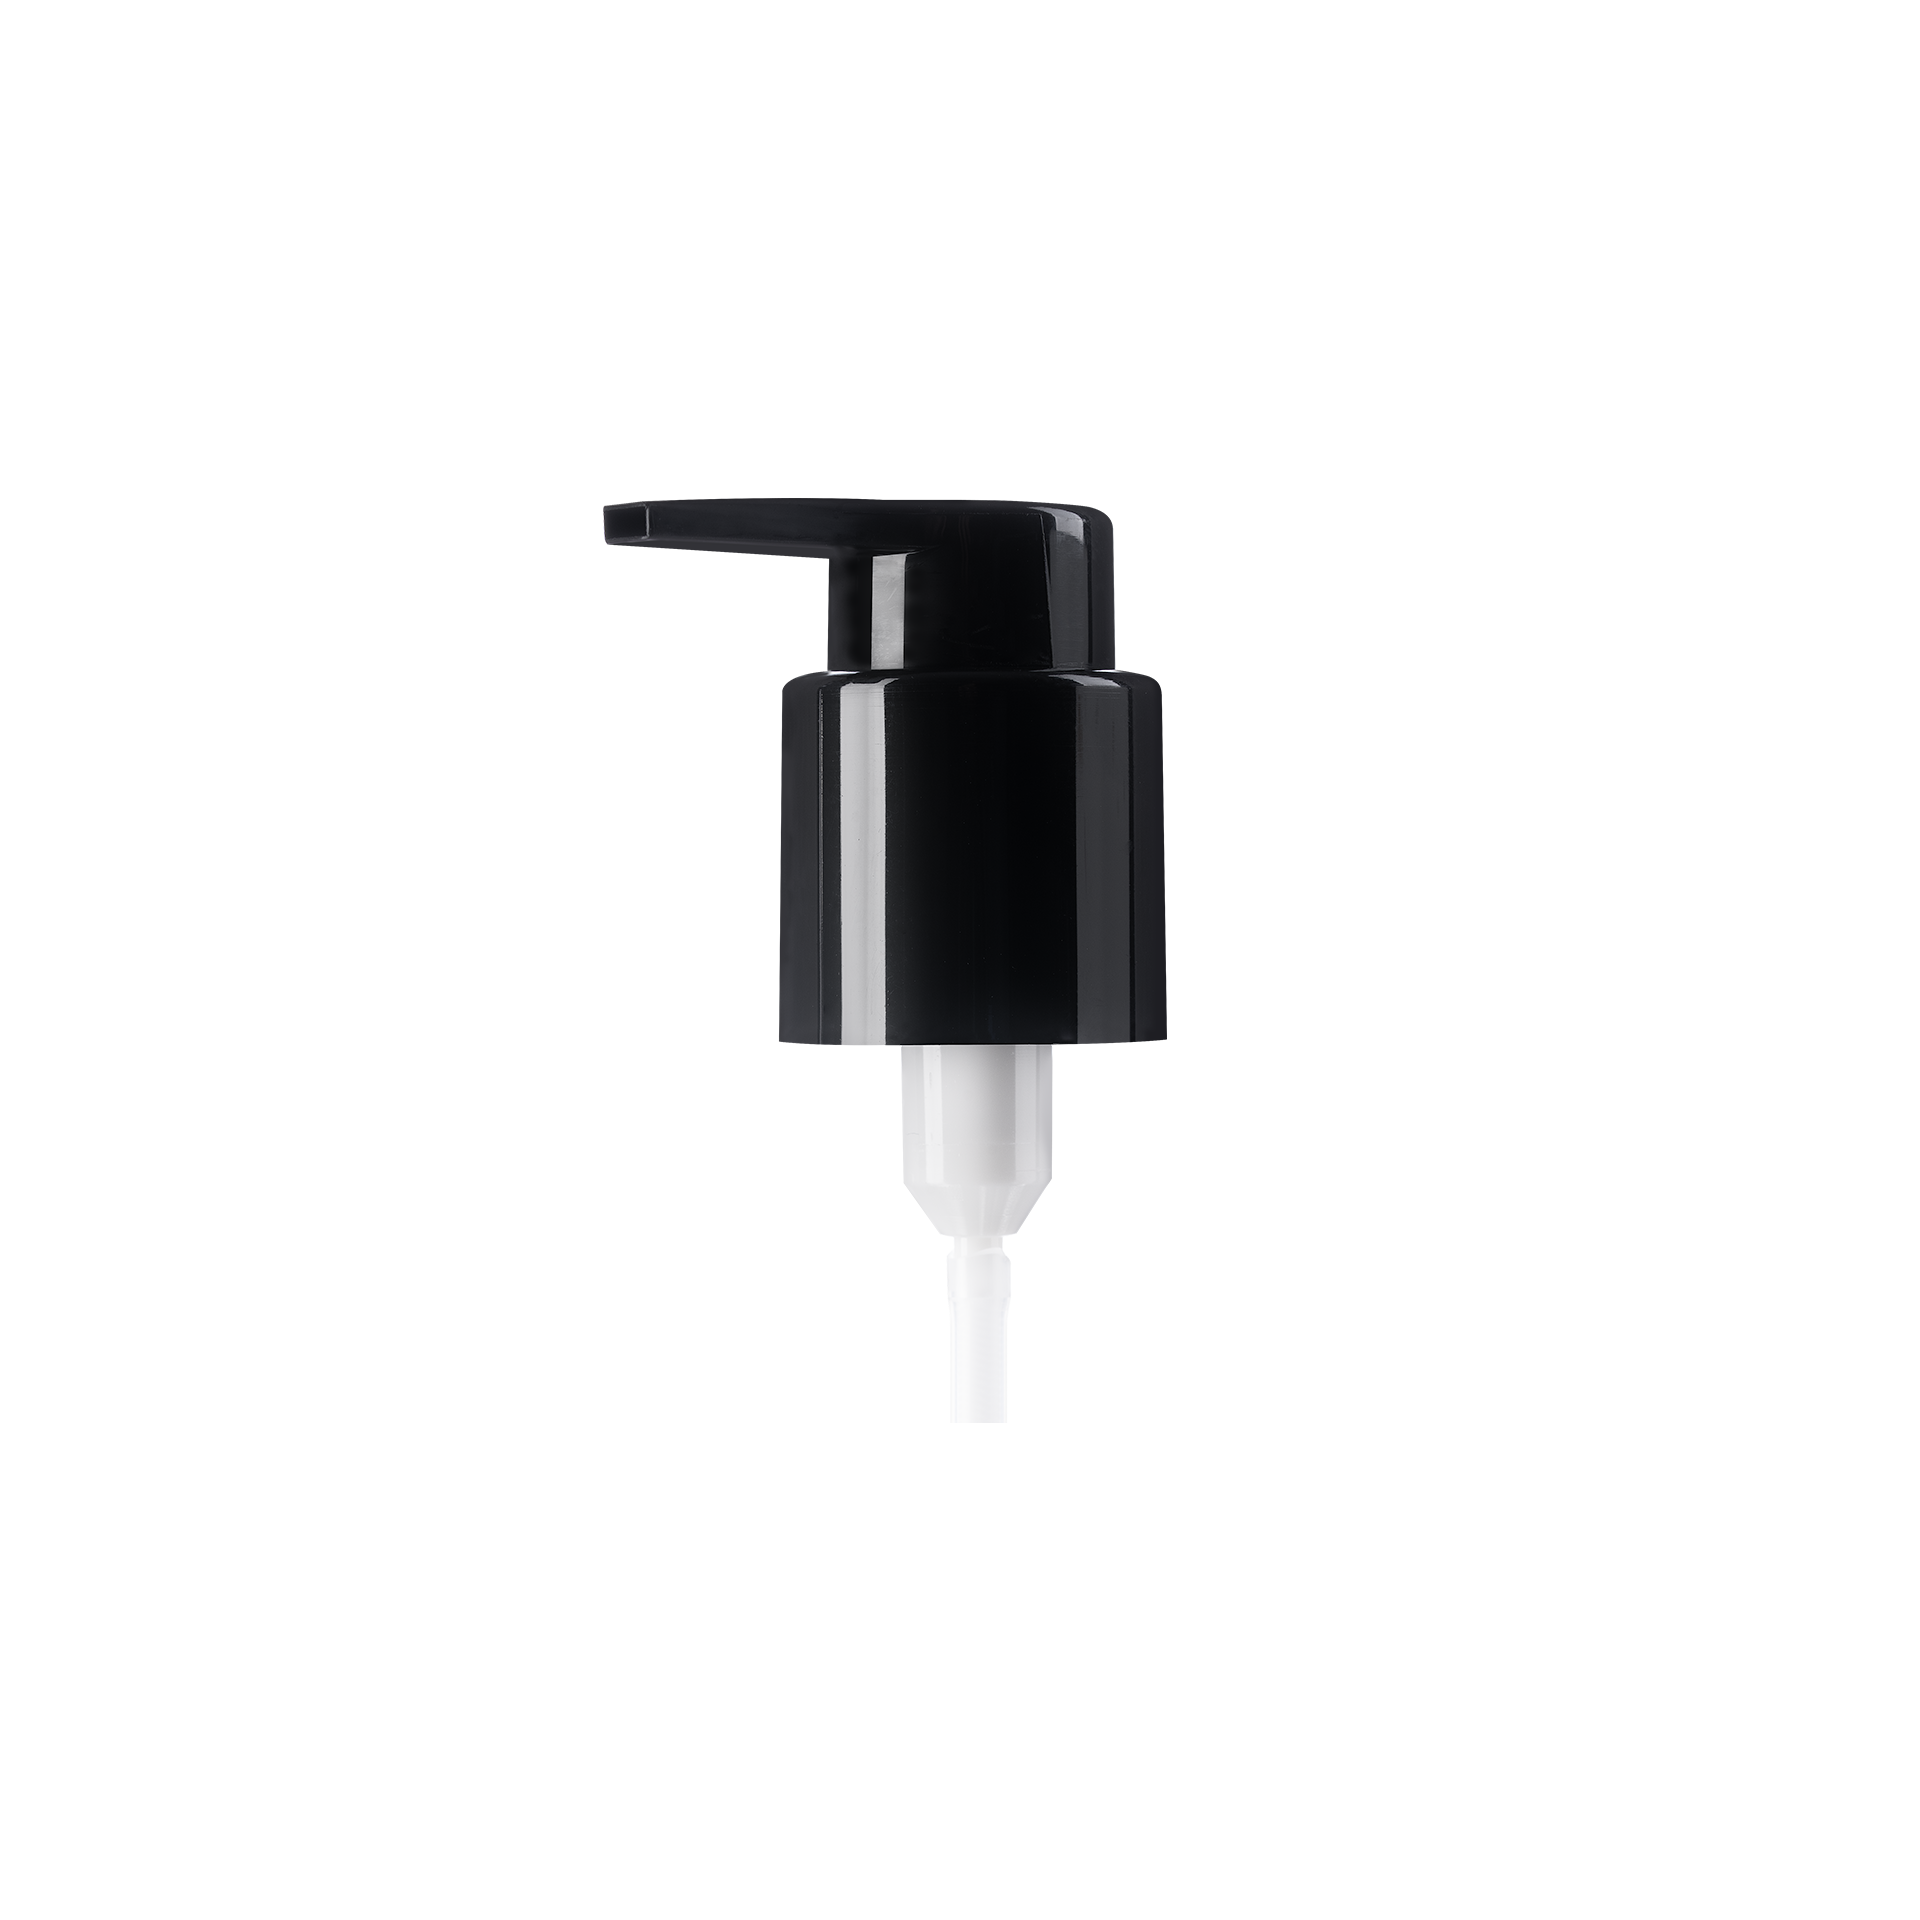 Lotion pump Extended Nozzle 24/410, PP, black, smooth, dose 0.50ml, security clip (Luna 150)